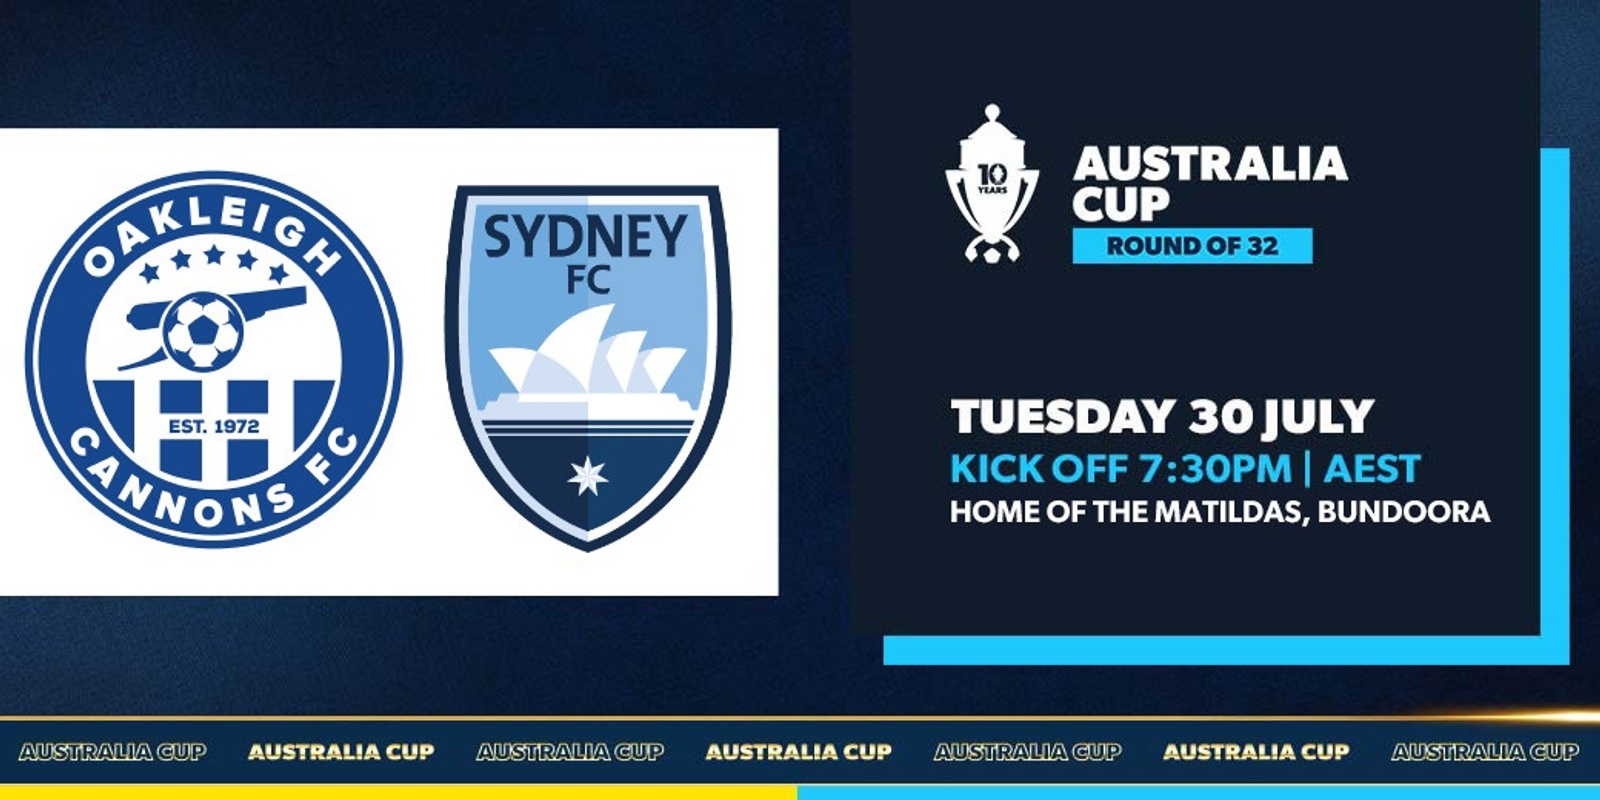 Banner image for Australia Cup Round of 32 Oakleigh Cannons FC vs Sydney FC